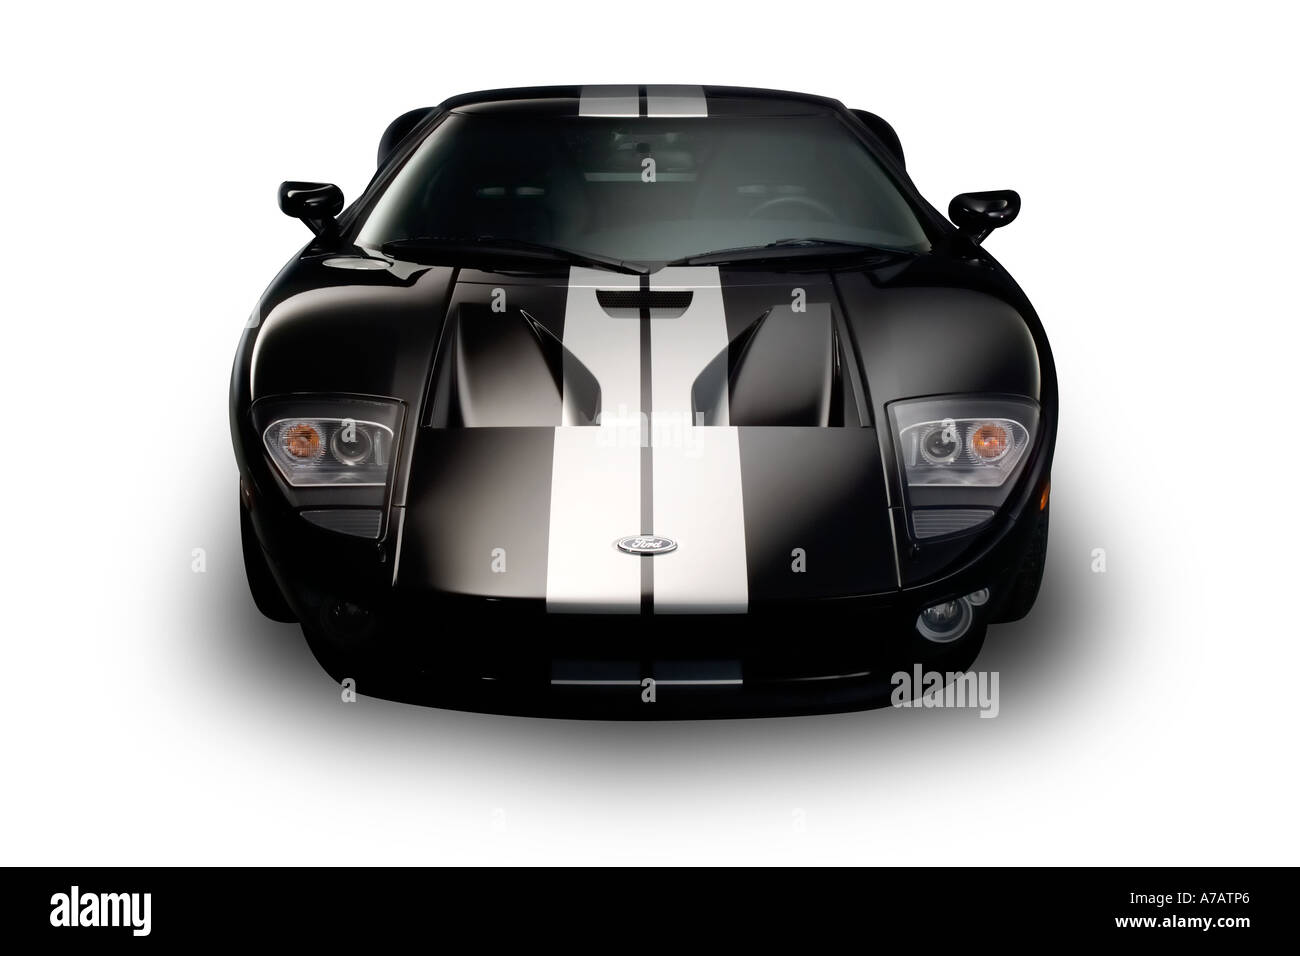 Gallery: GT1 updates the 2005 Ford GT as a 1,400-horsepower hypercar